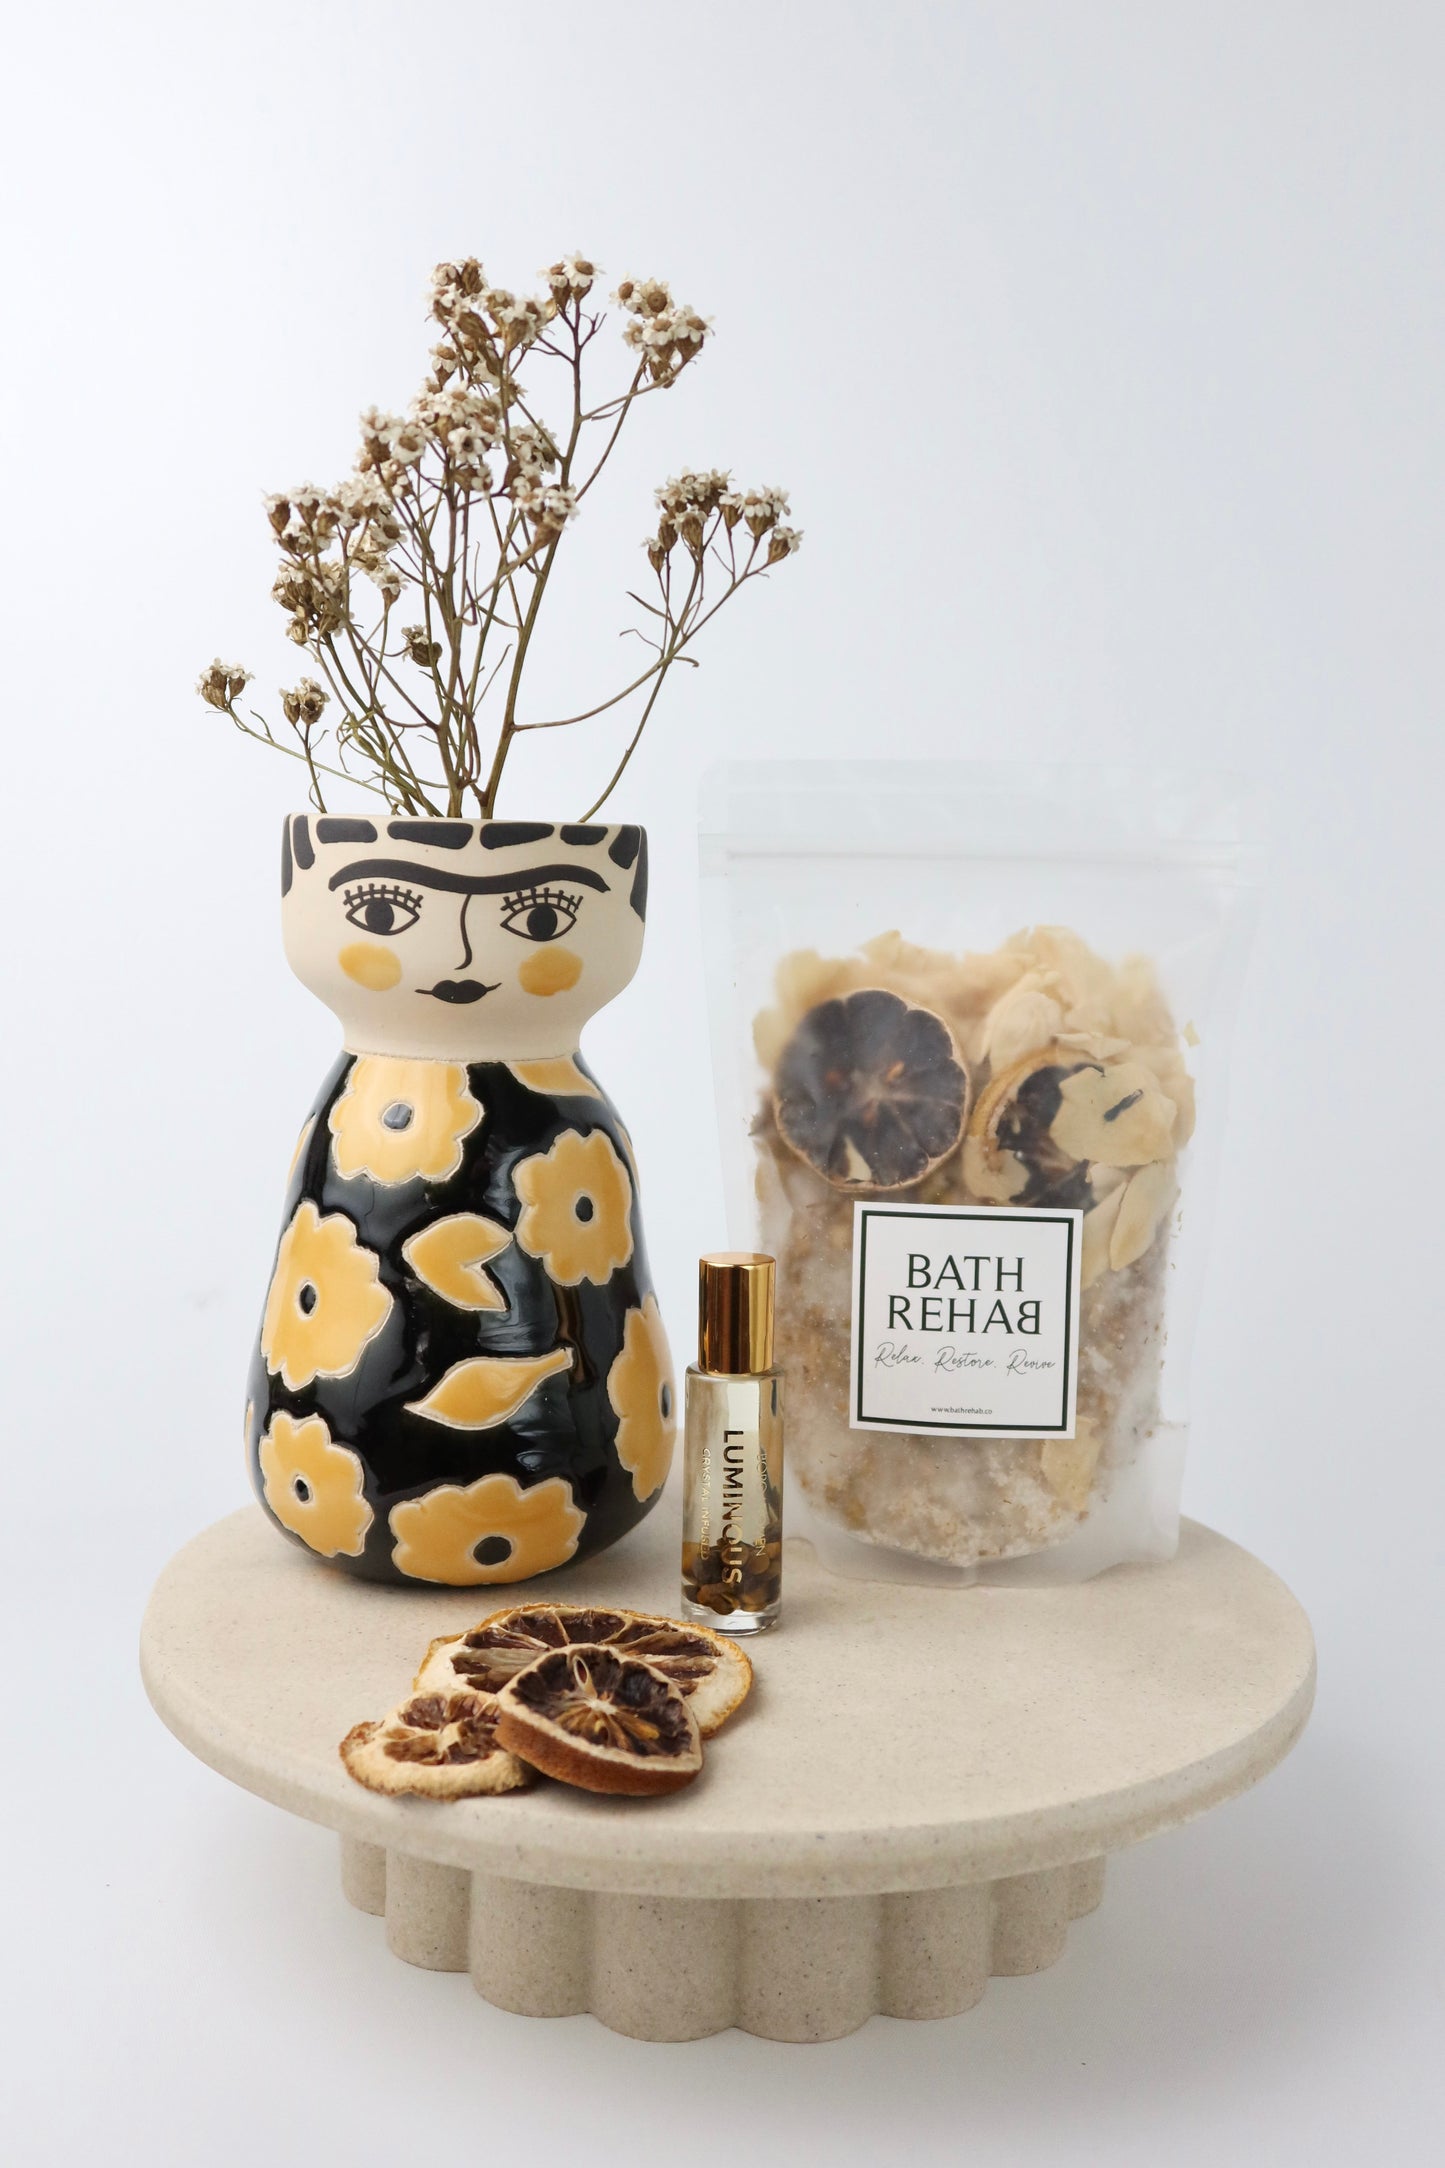 The 'Marigold' Gift Hamper including a citrus blend of bath soak by Bath Rehab, Luminious crystal perfume roller by Bopo Women and a handmade ceramic face vase by Jones and Co.